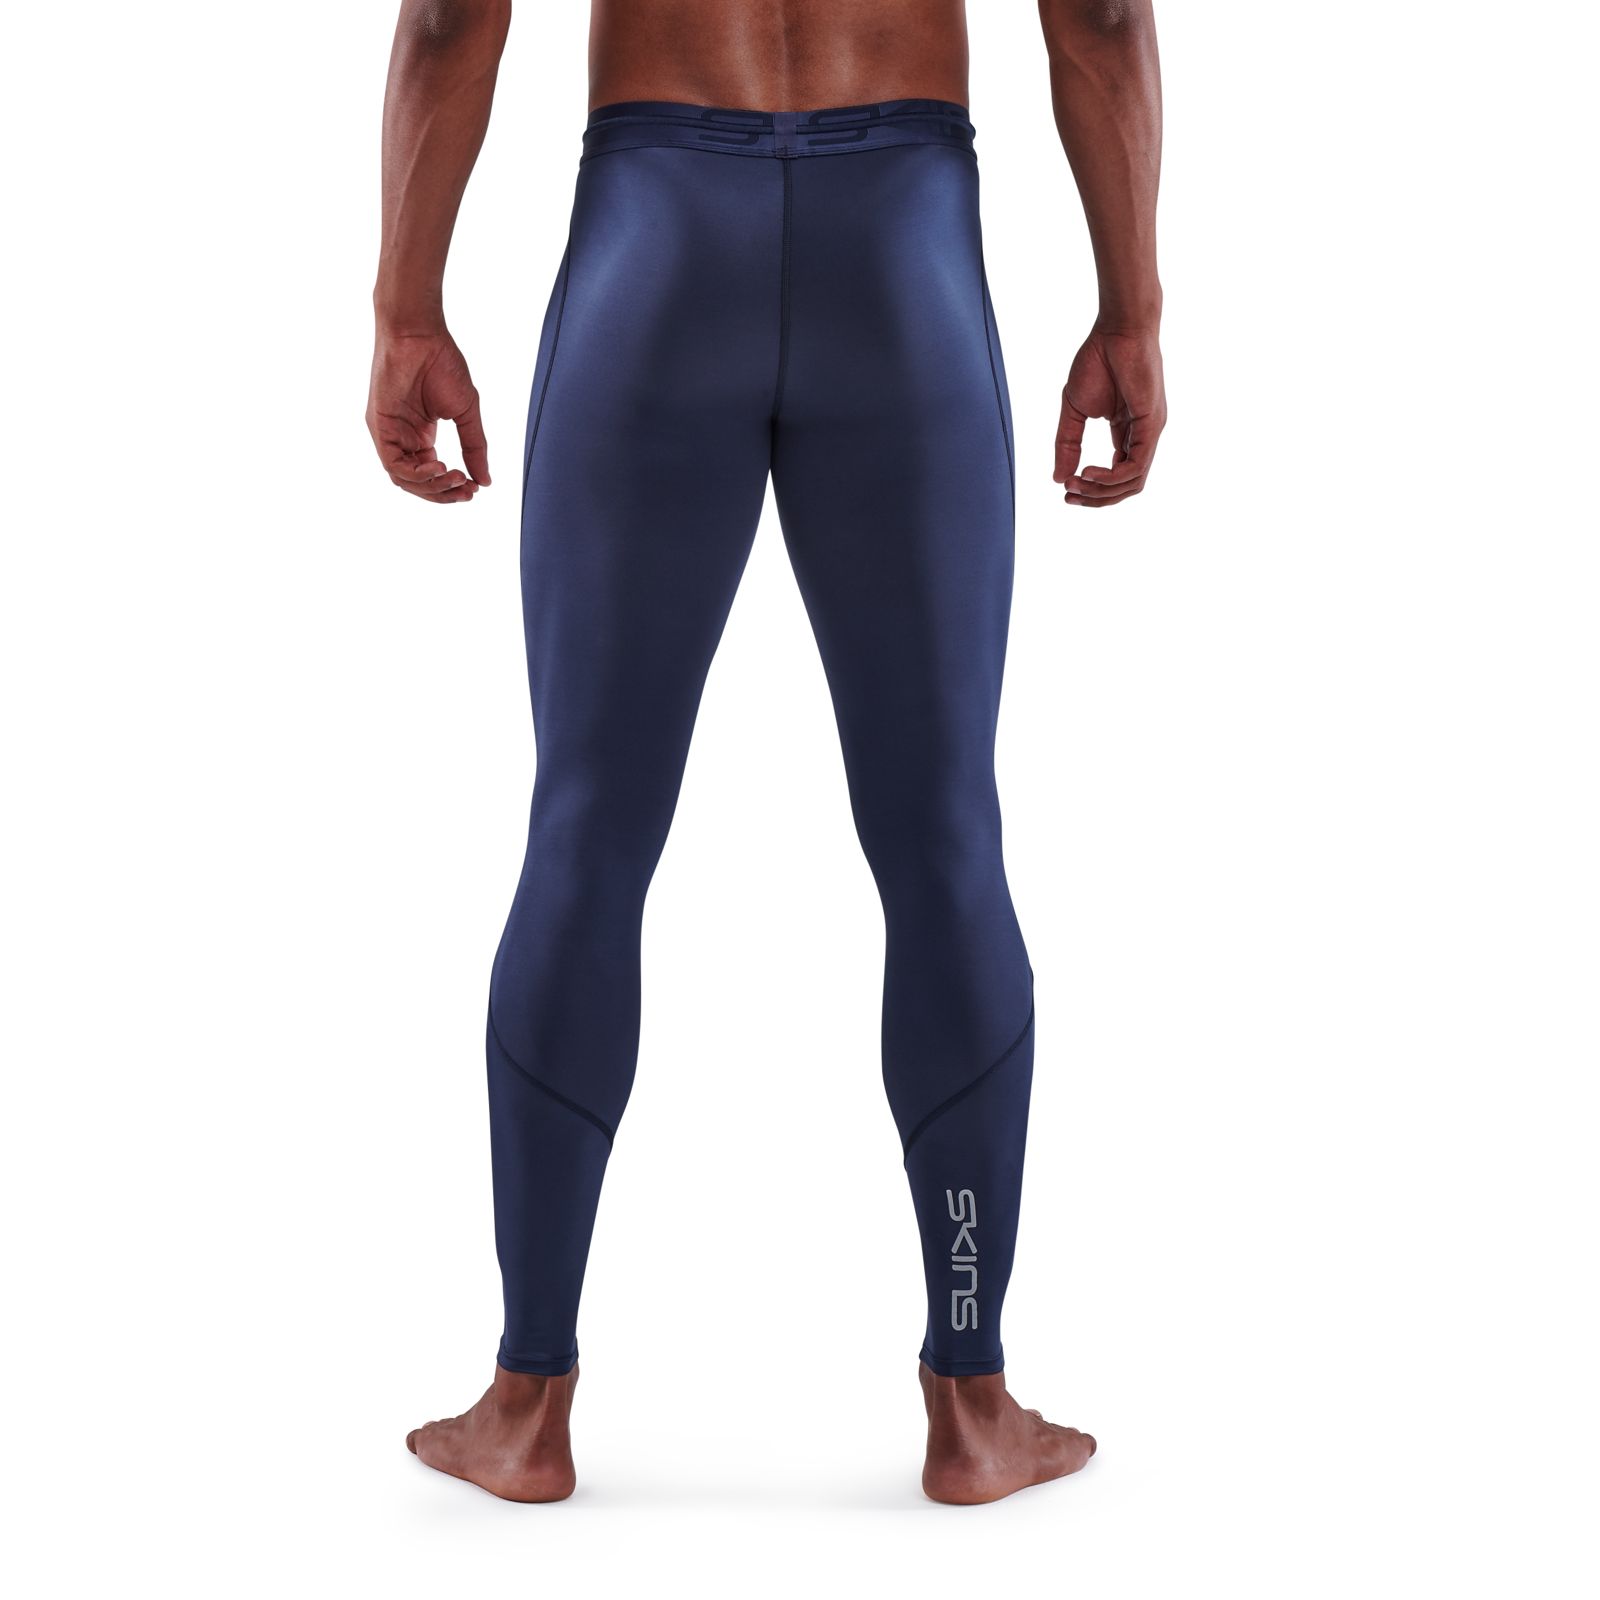 SKINS SERIES-3 MEN'S TRAVEL AND RECOVERY LONG TIGHTS NAVY BLUE